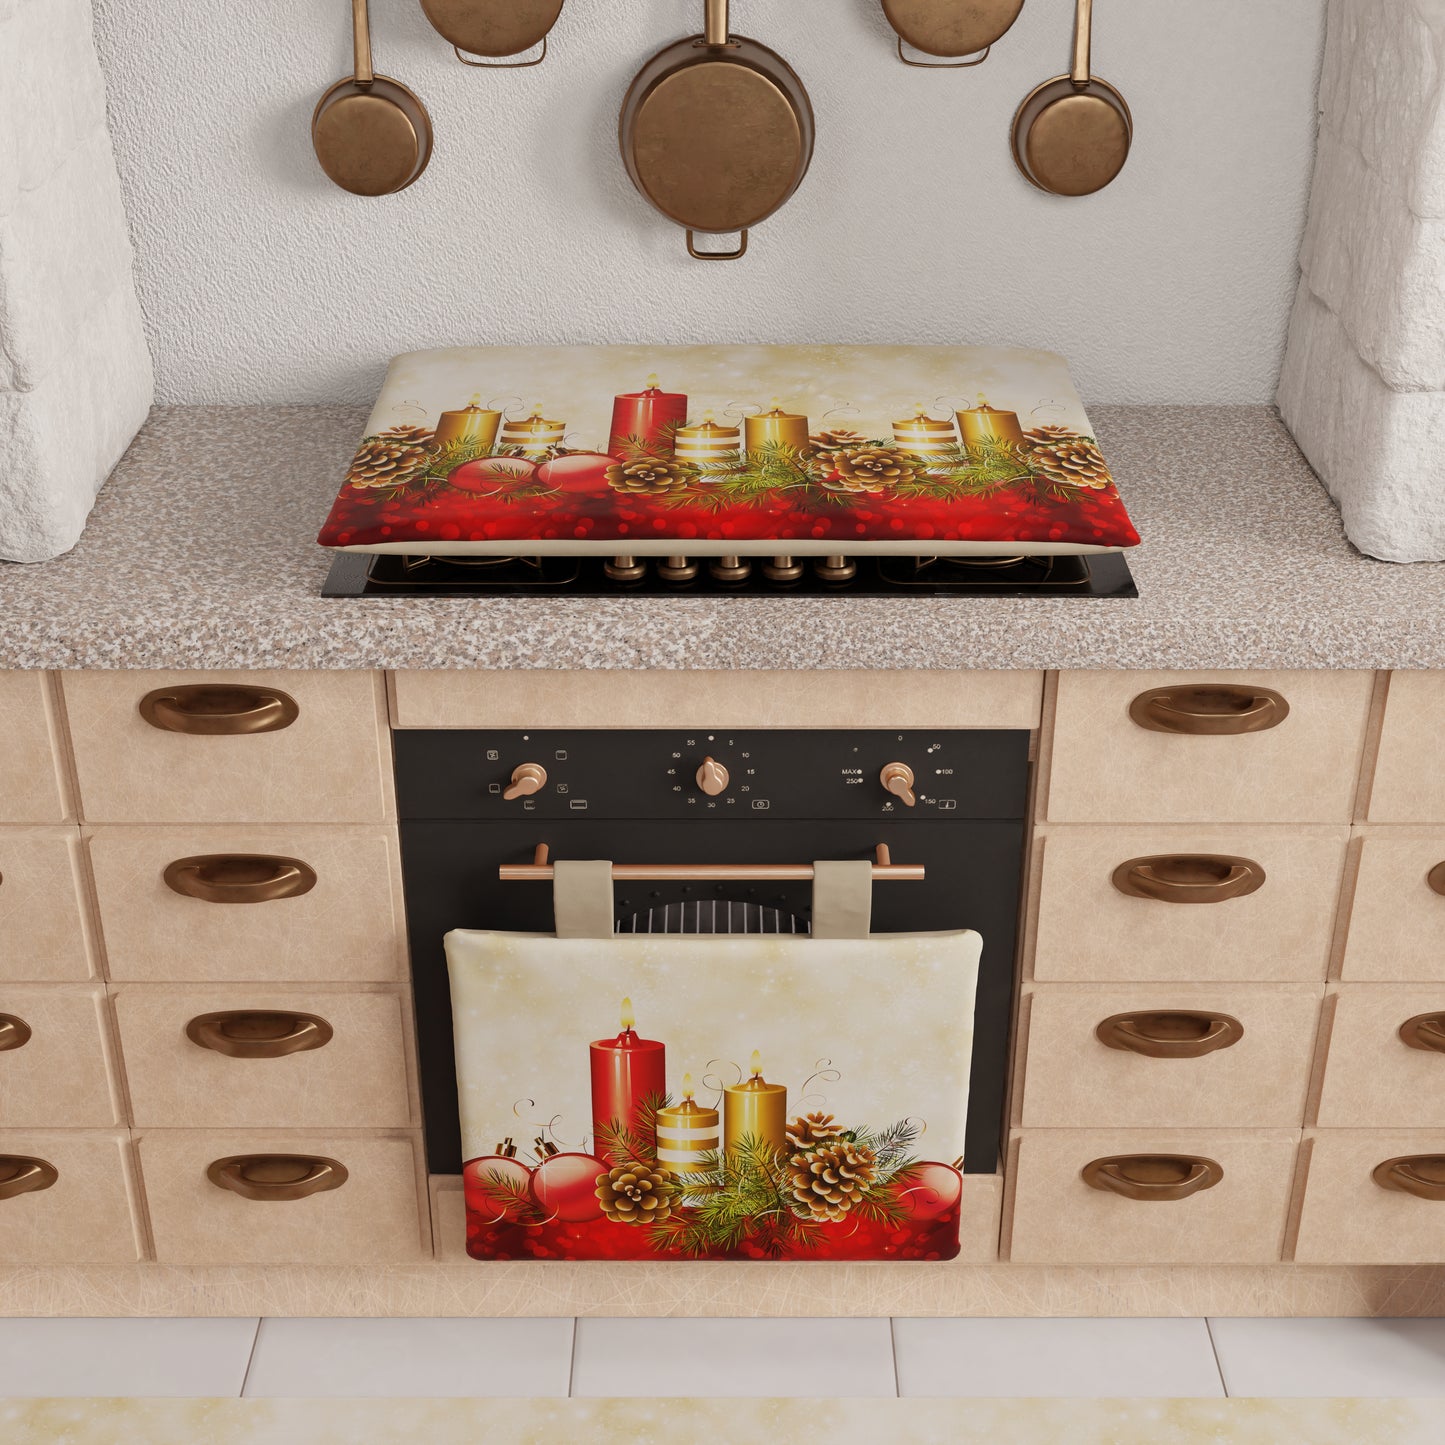 Christmas Oven Cover for Kitchen in Digital Print Candles 1pc 40x50cm